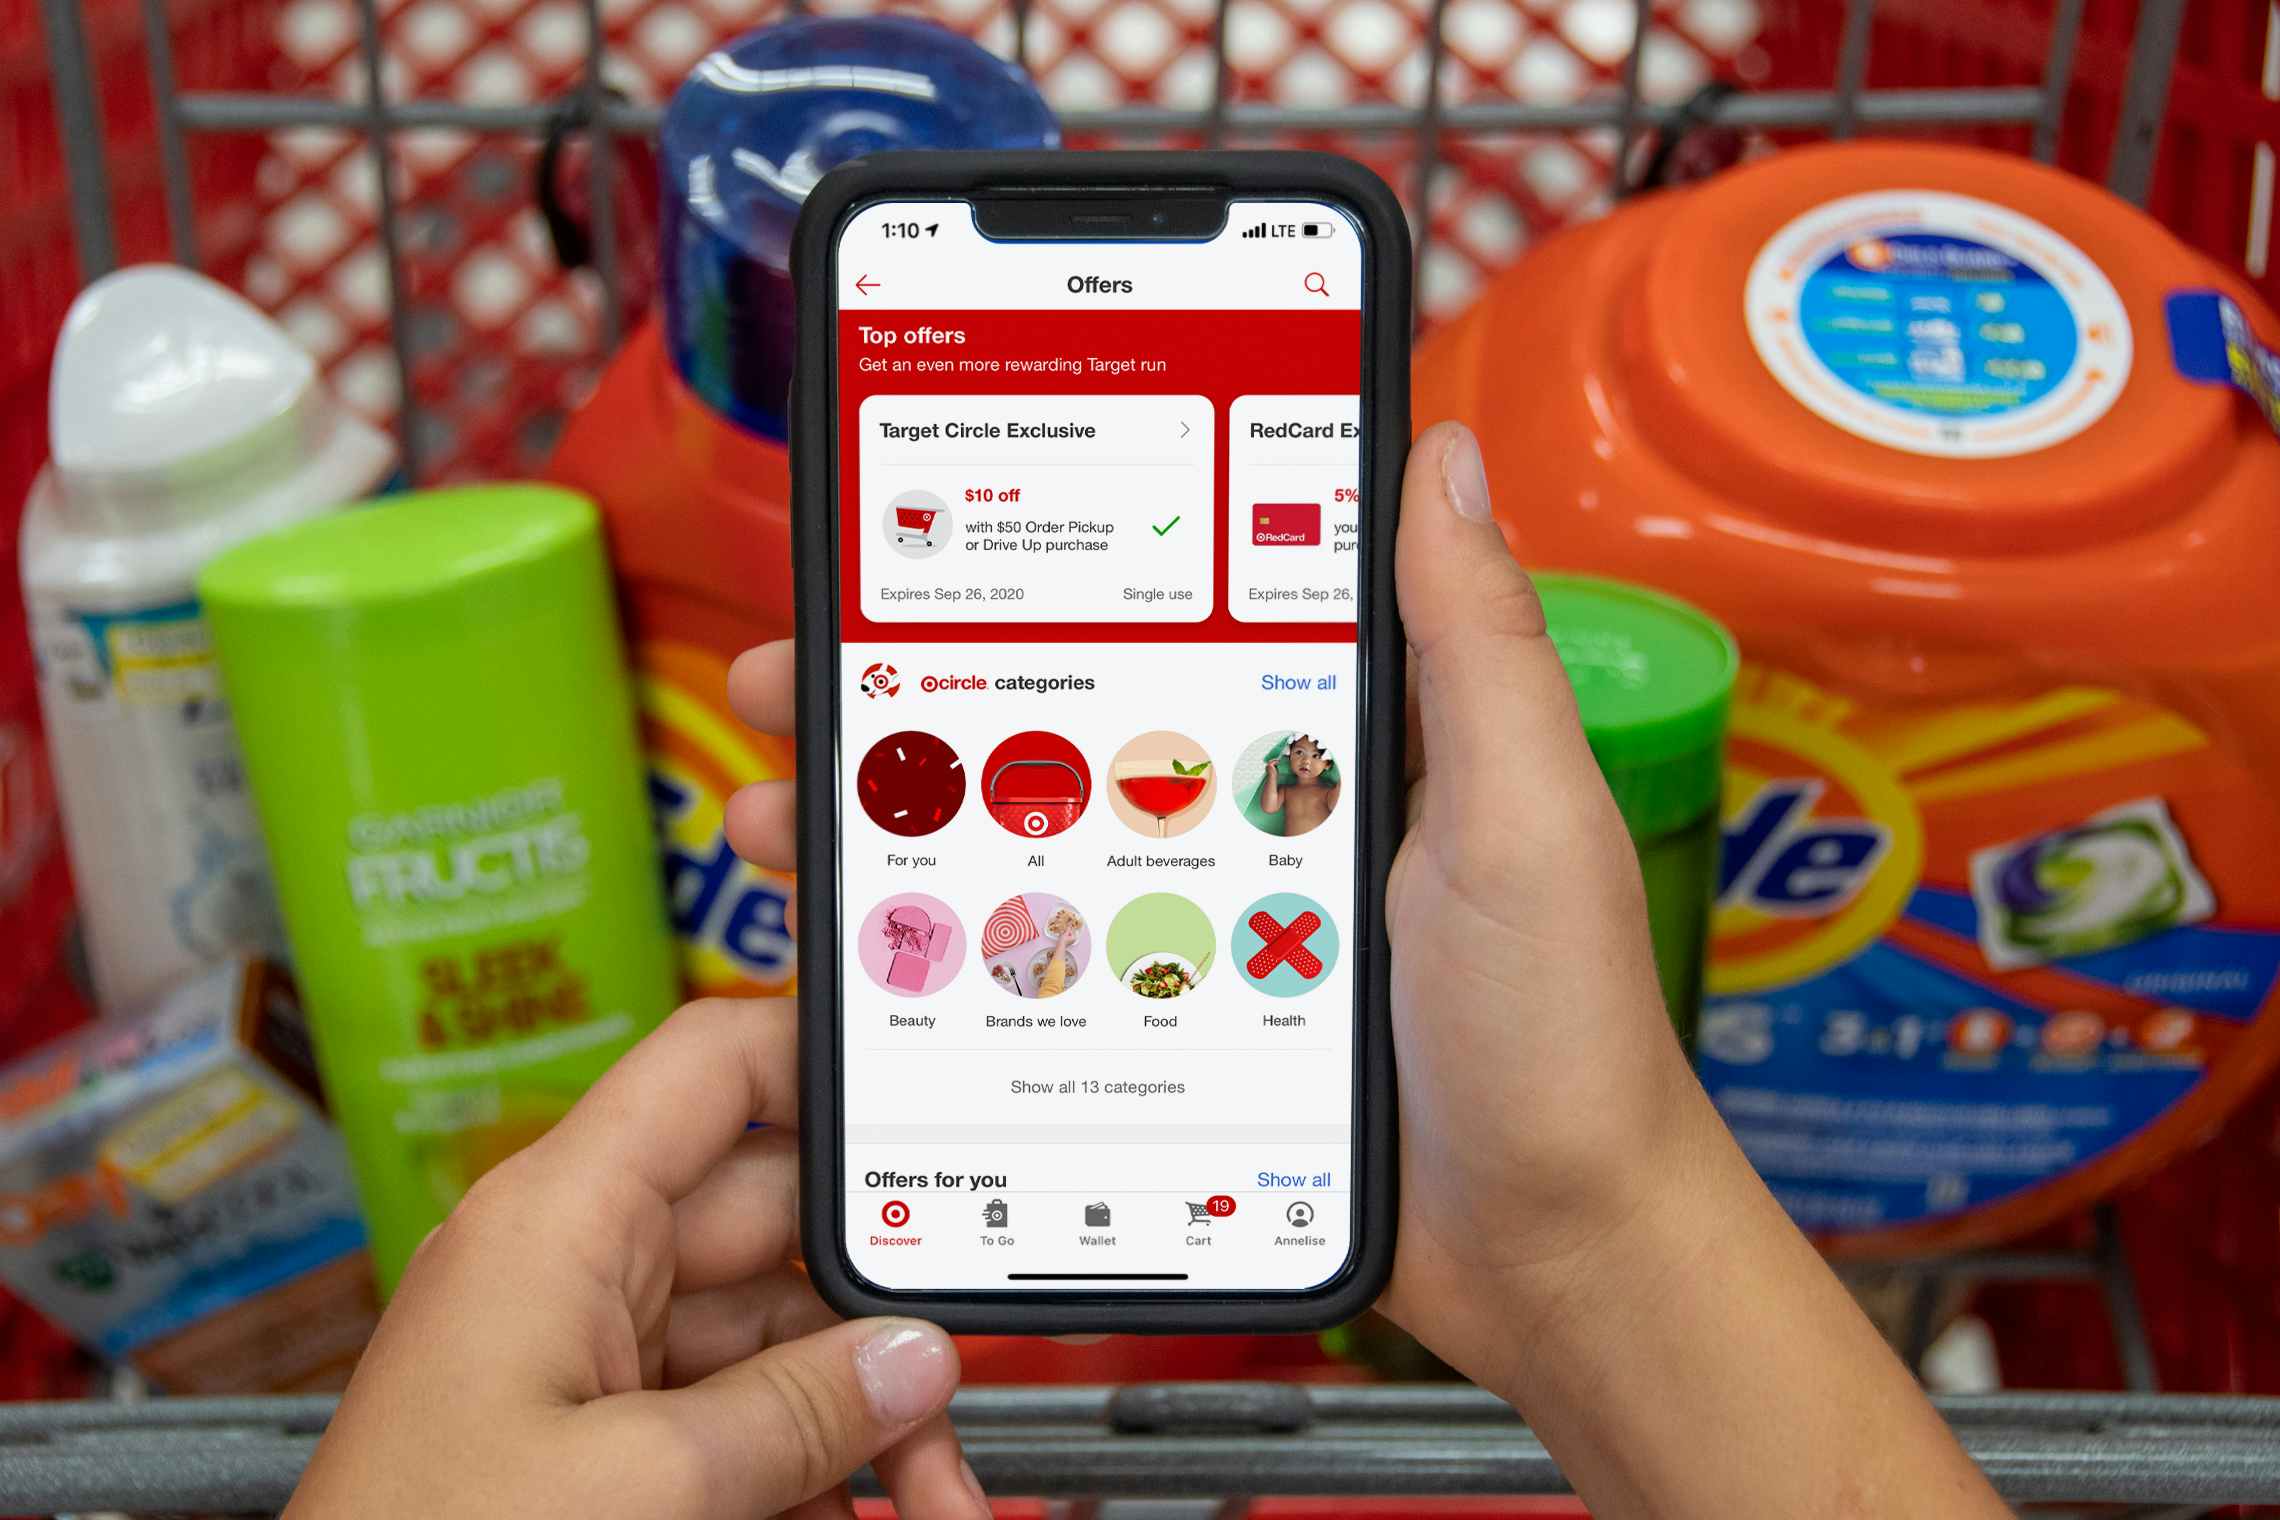 A person's hands holding a phone displaying the Target mobile app's Offers page in front of a Target shopping cart's basket filled with ...